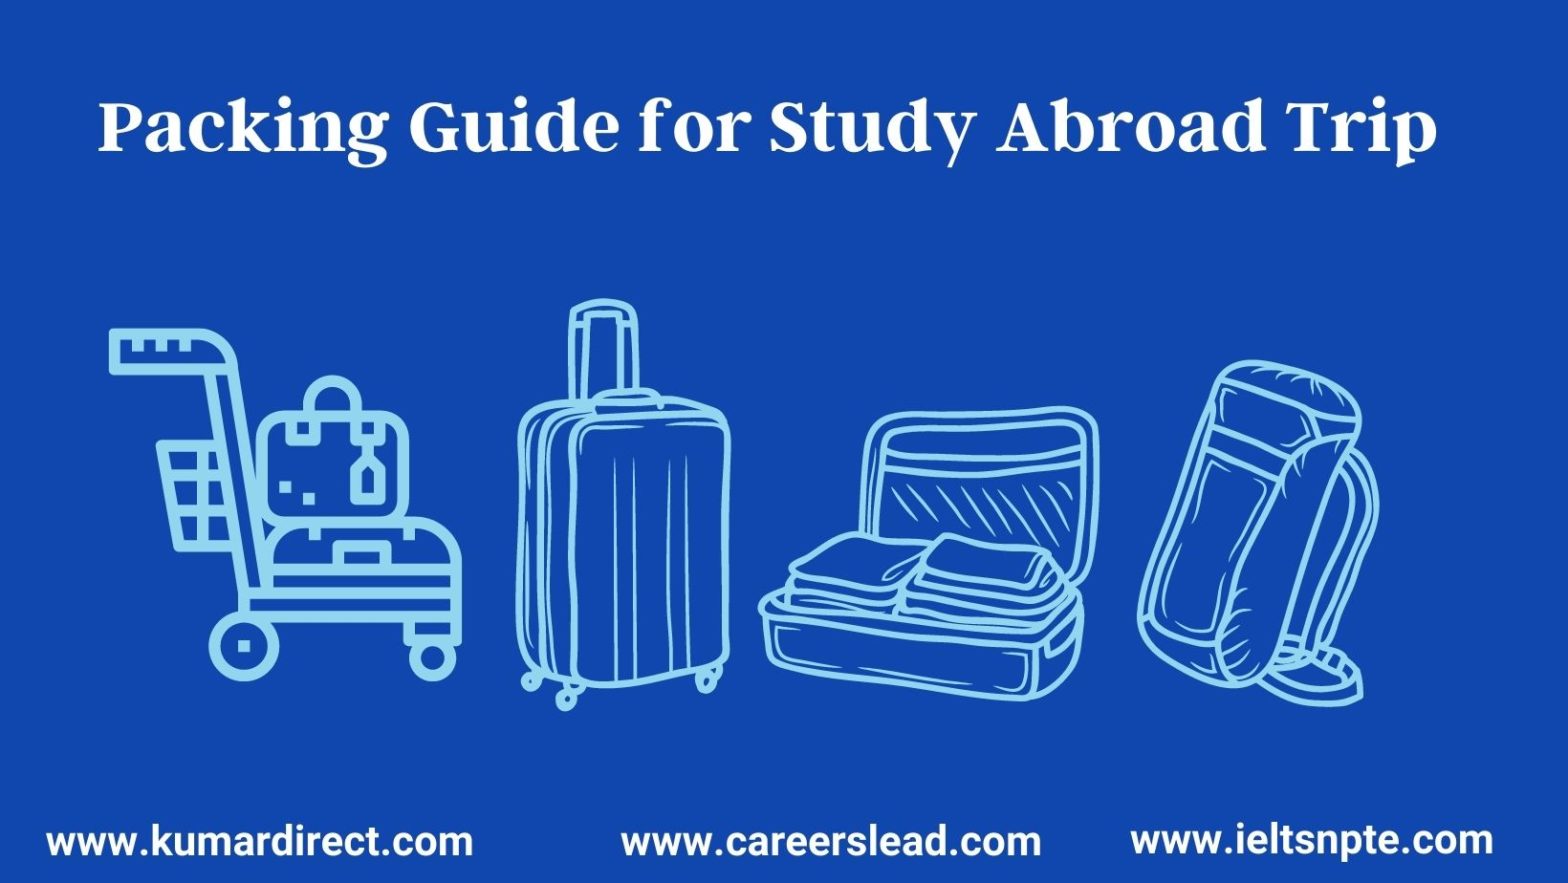 Packing Guide for Study Abroad Trip